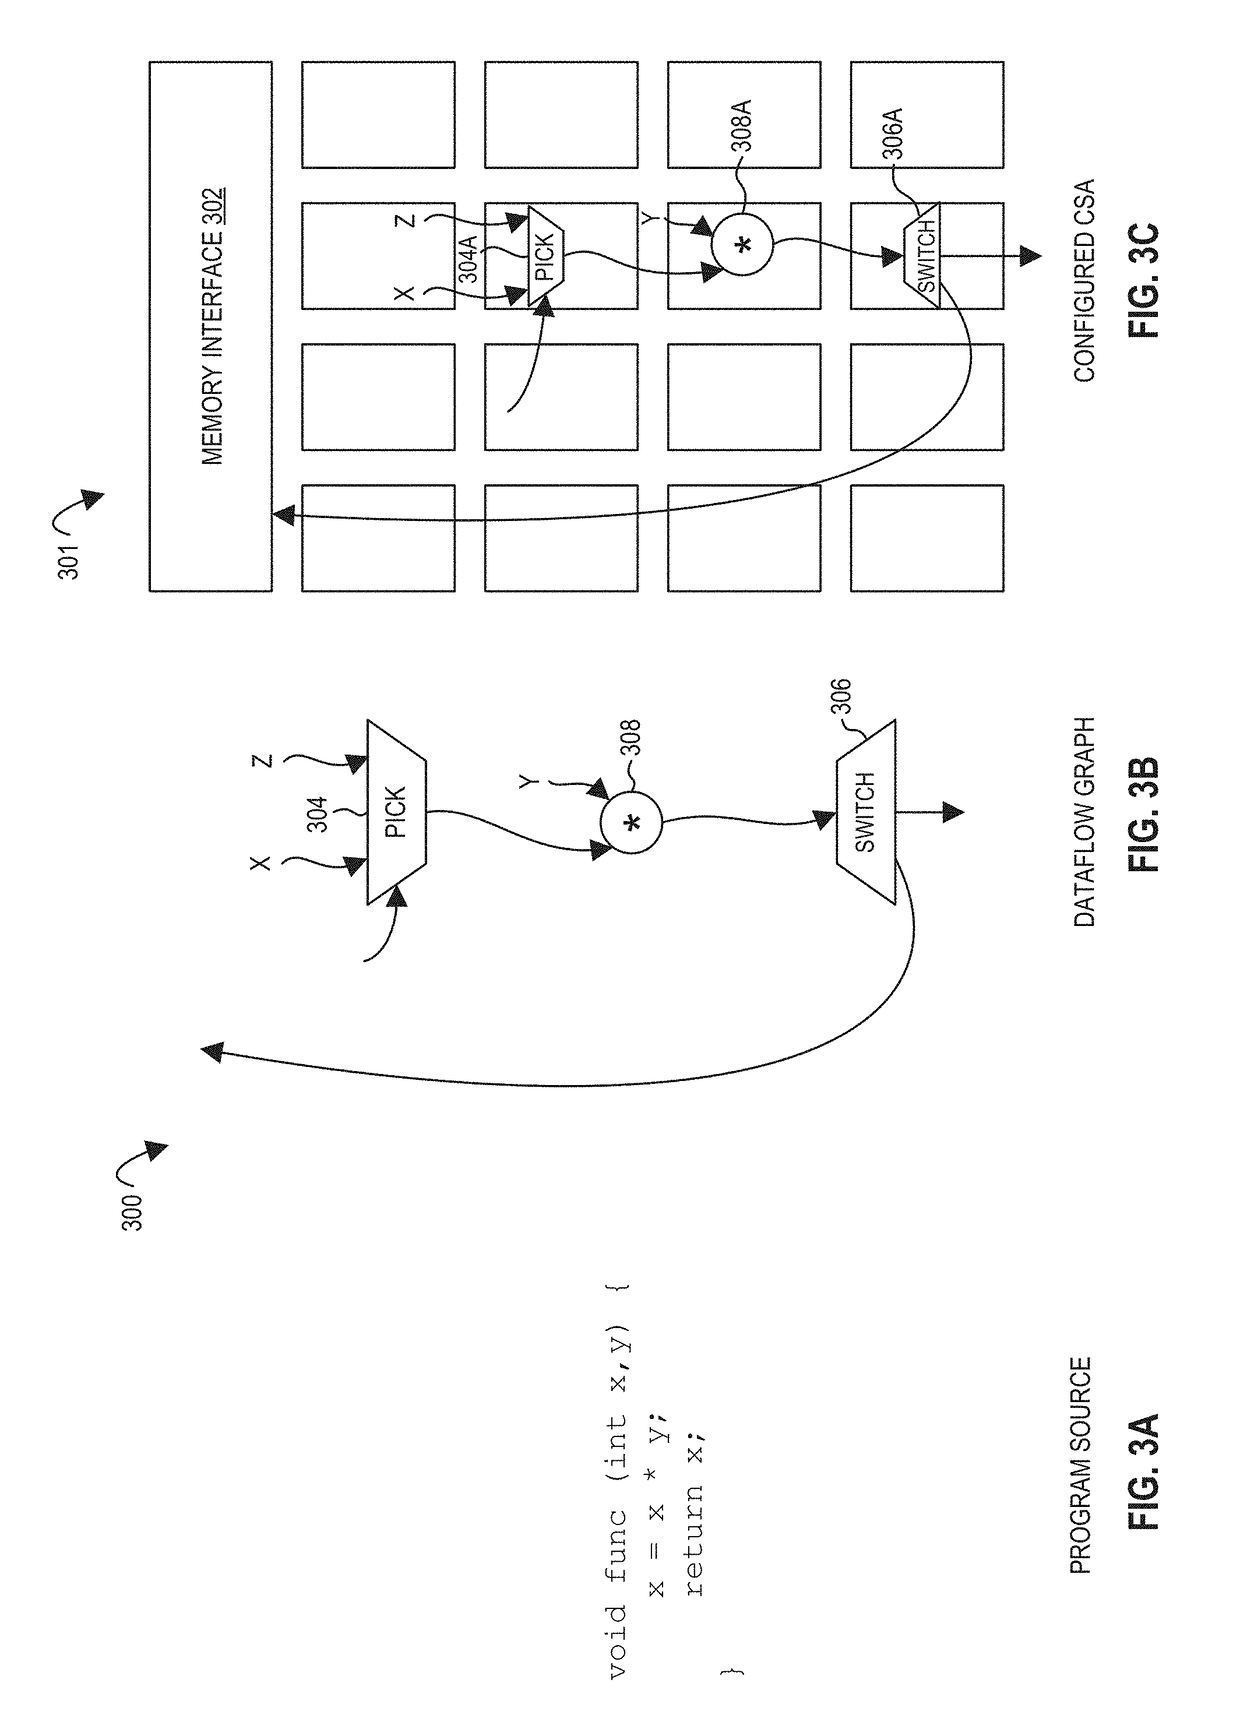 Processors, methods, and systems for a configurable spatial accelerator with security, power reduction, and performace features